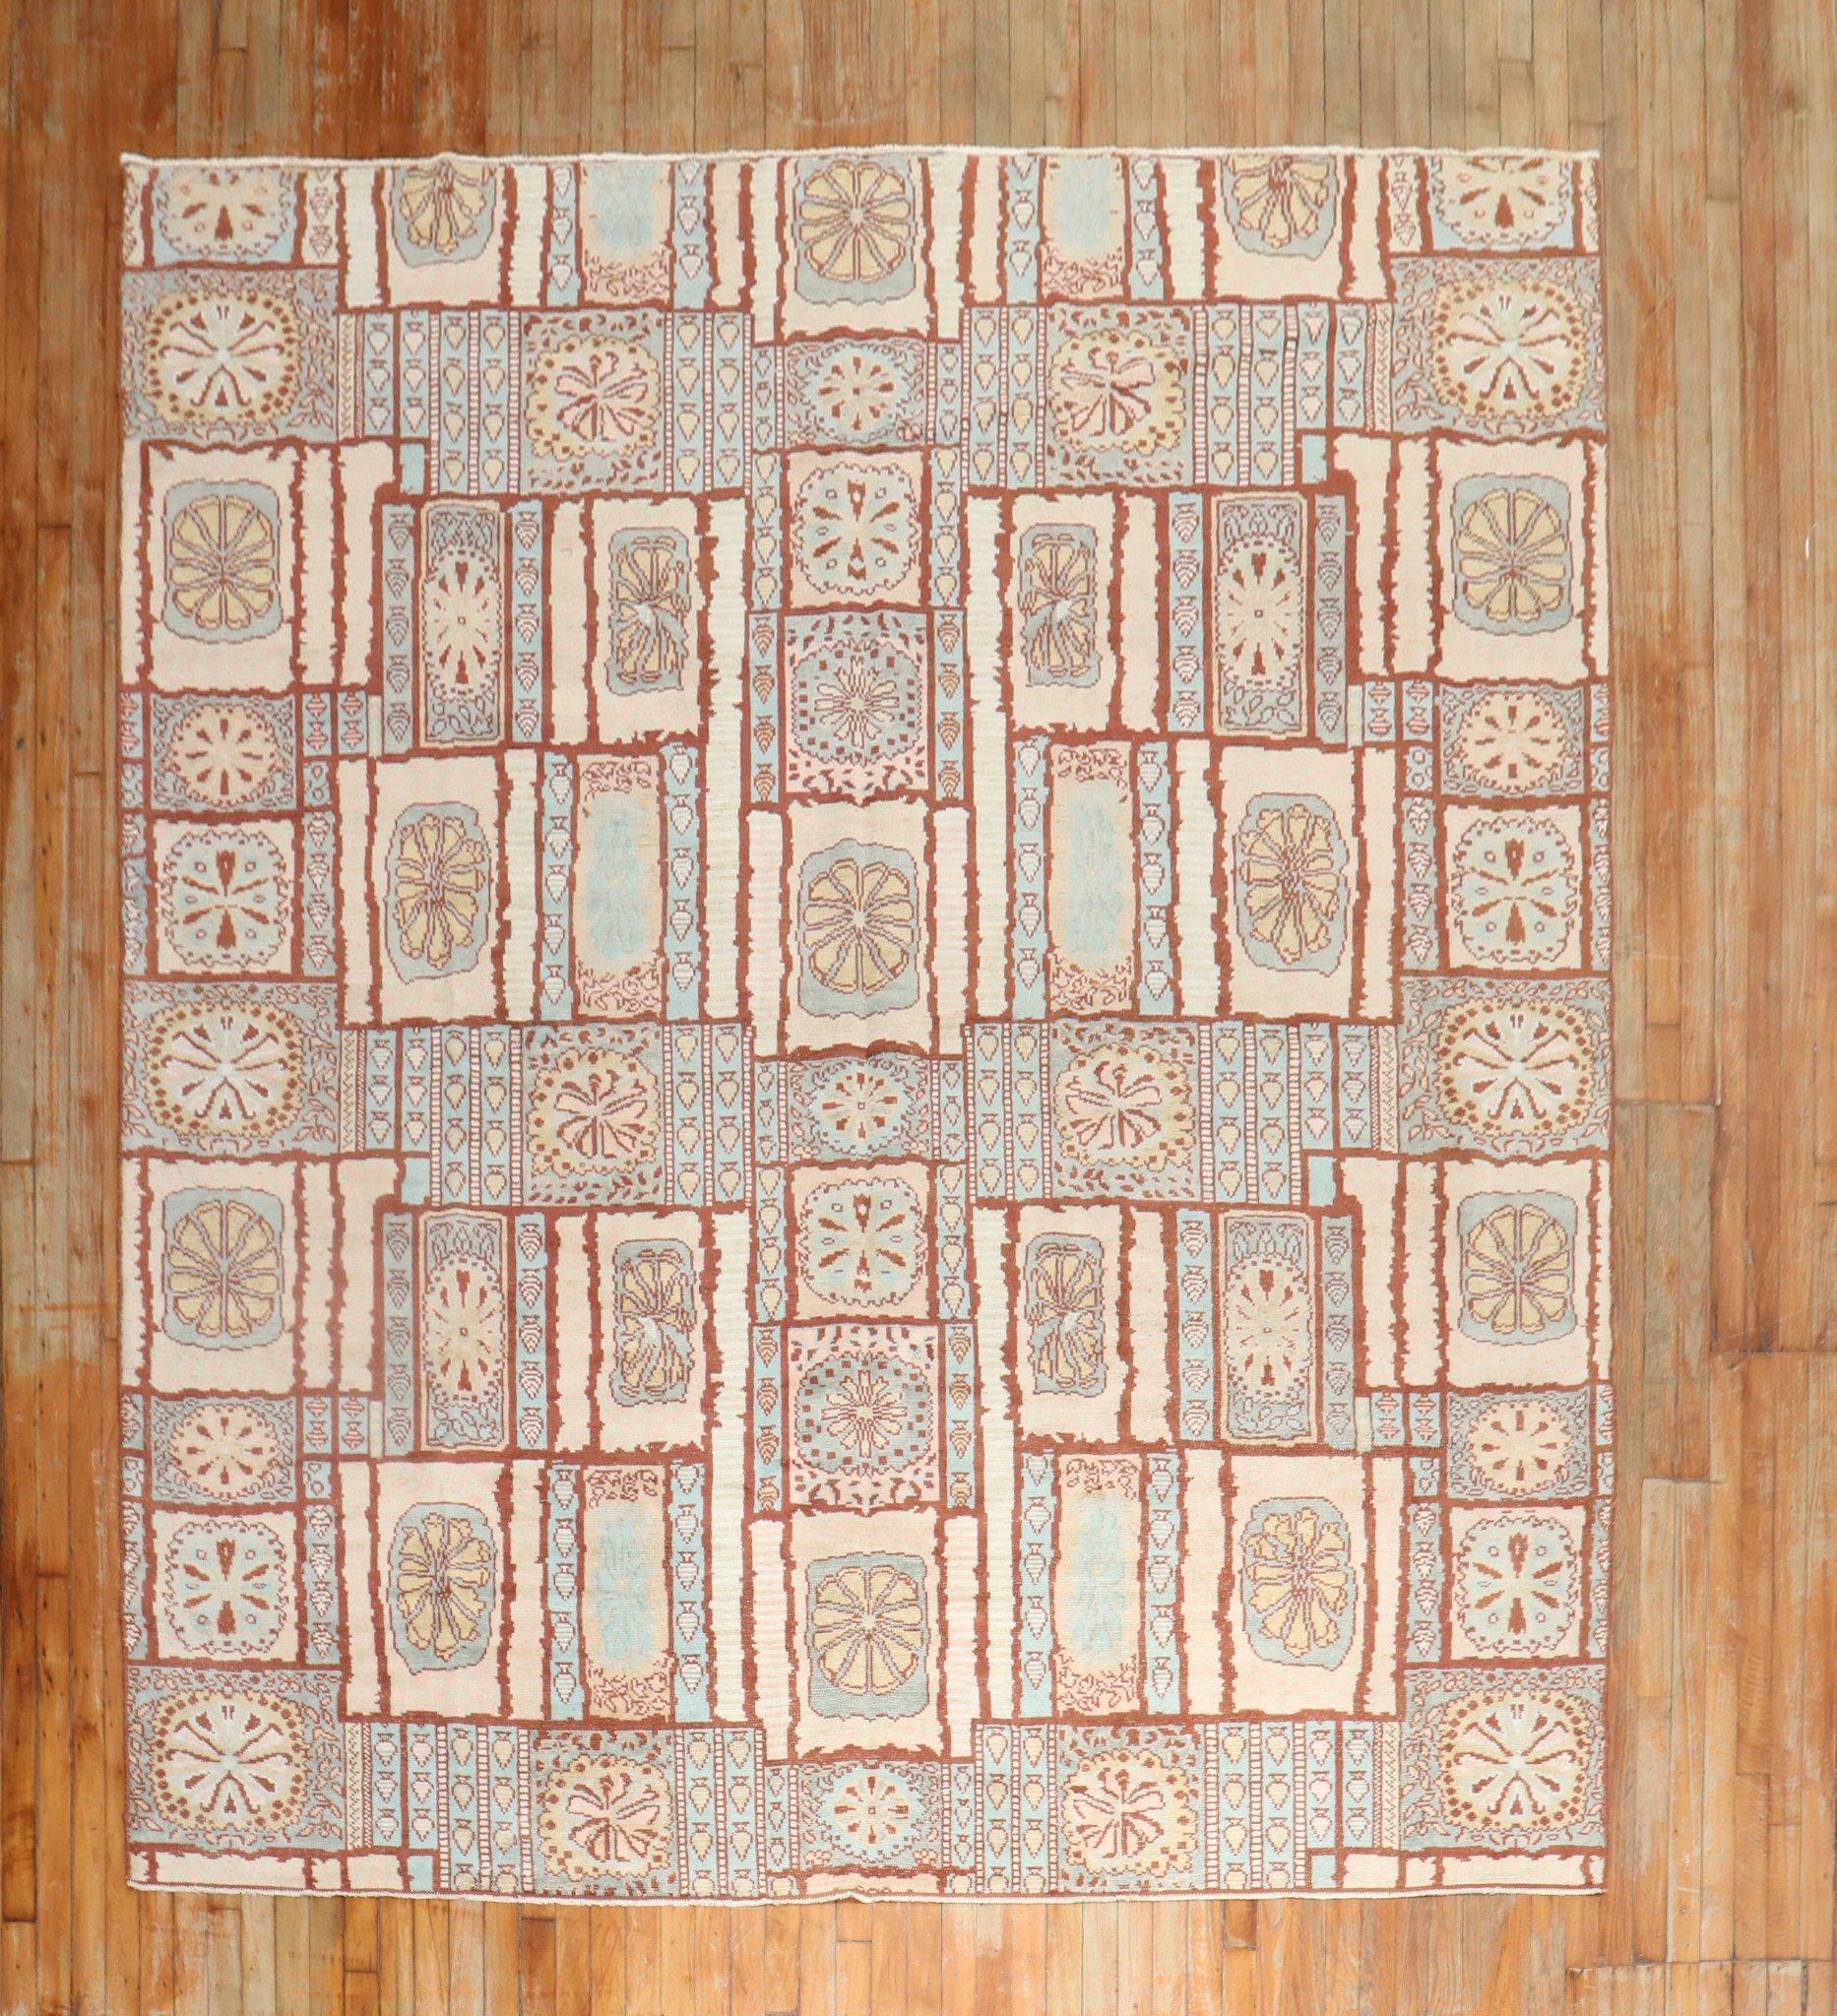 Unusual North African small room size whimsical carpet influenced by European Decor from the 1st quarter of the 20th century. Purchased from a private European collector who had in his collection for the past half century.

Measures: 8'1'' x